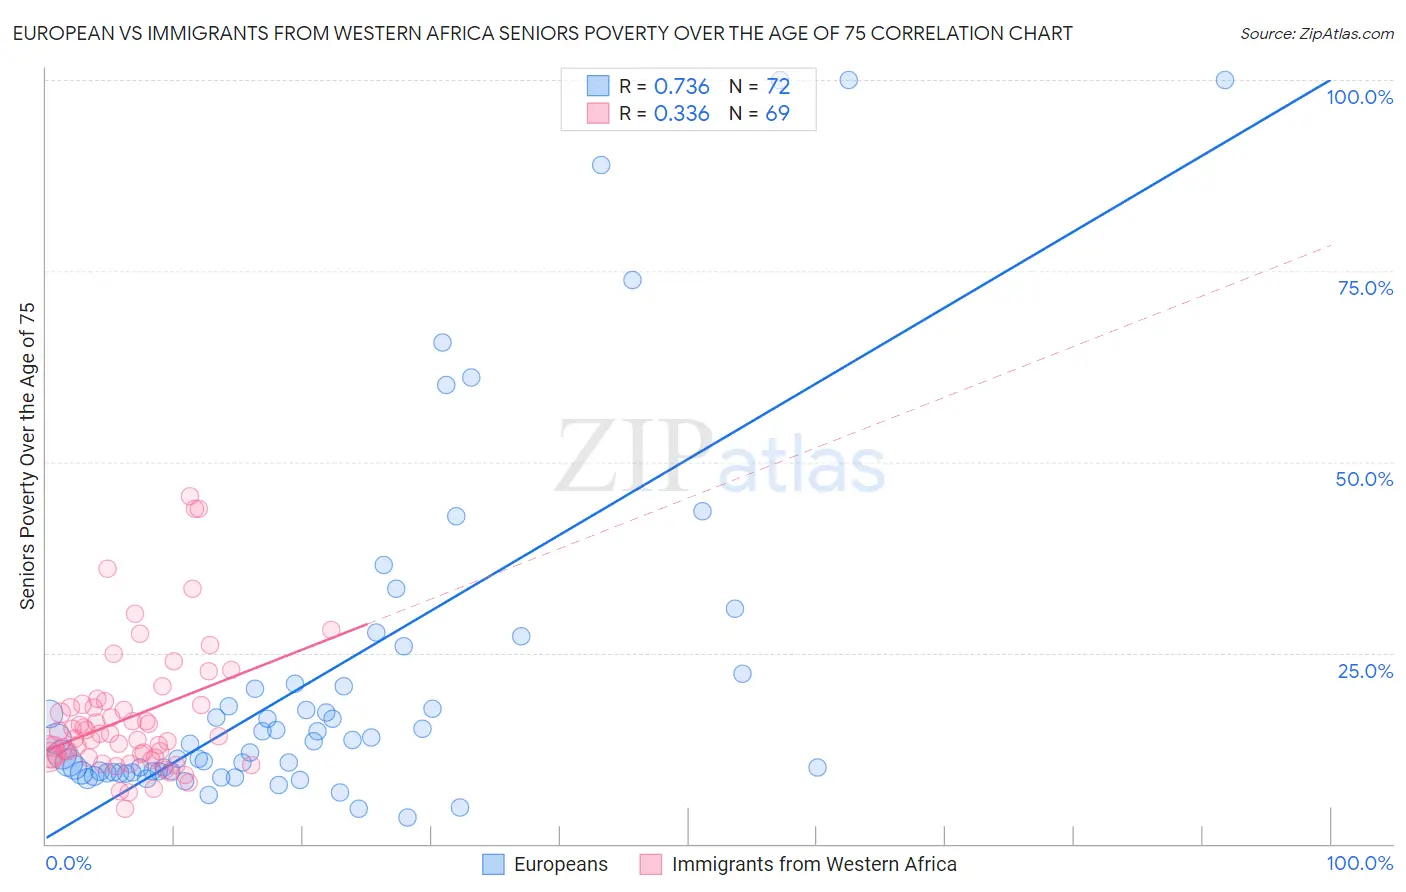 European vs Immigrants from Western Africa Seniors Poverty Over the Age of 75